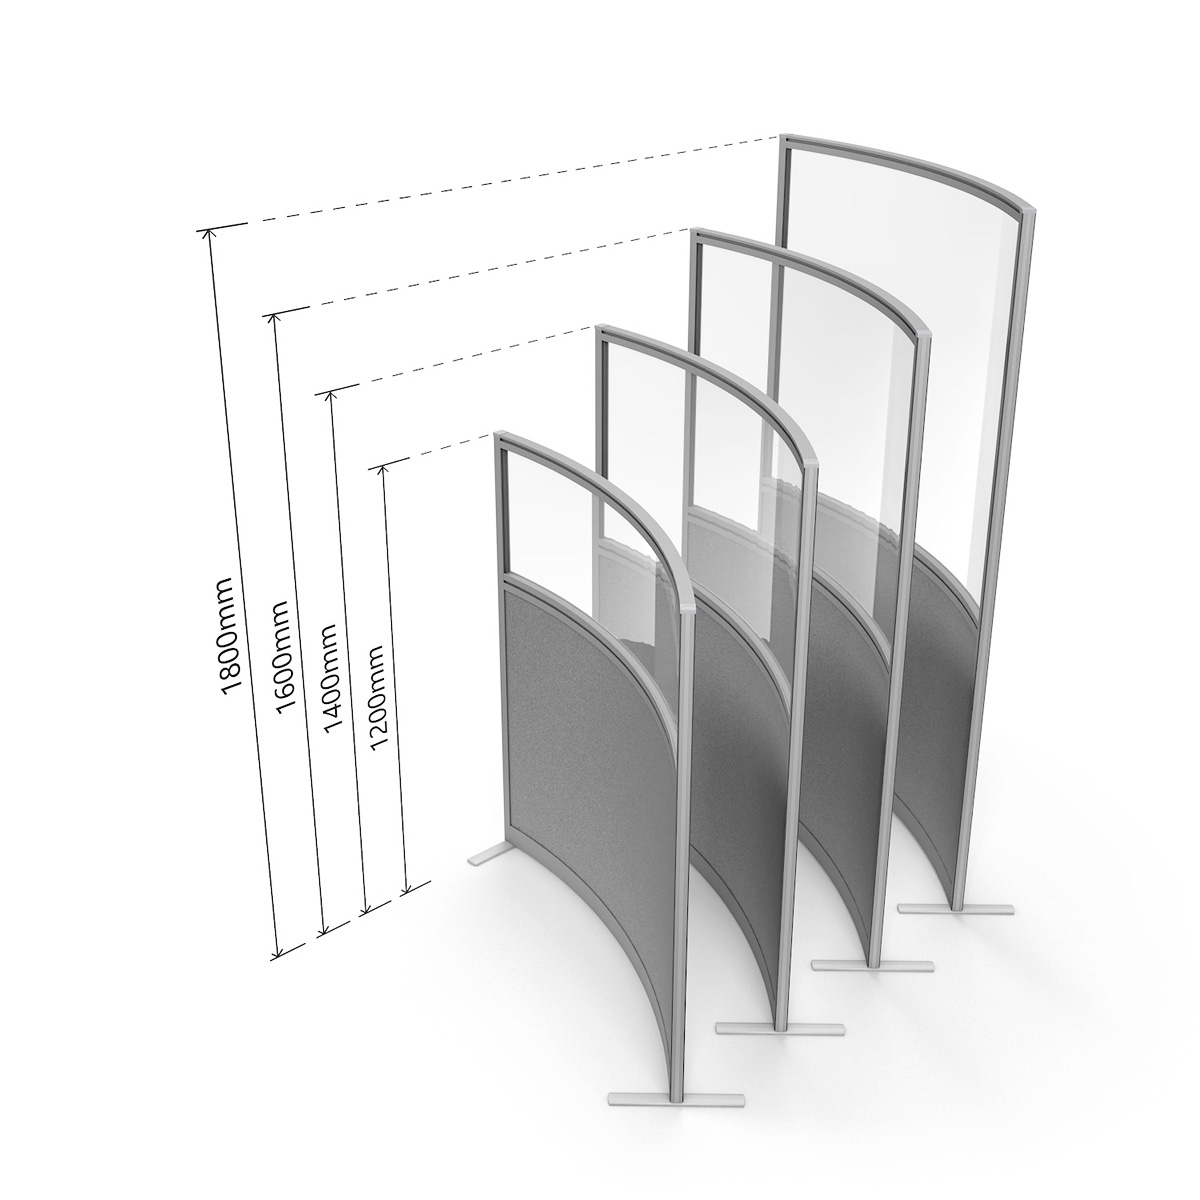 FRONTIER® Curved Glass Perspex Screens Are Available in Four Heights